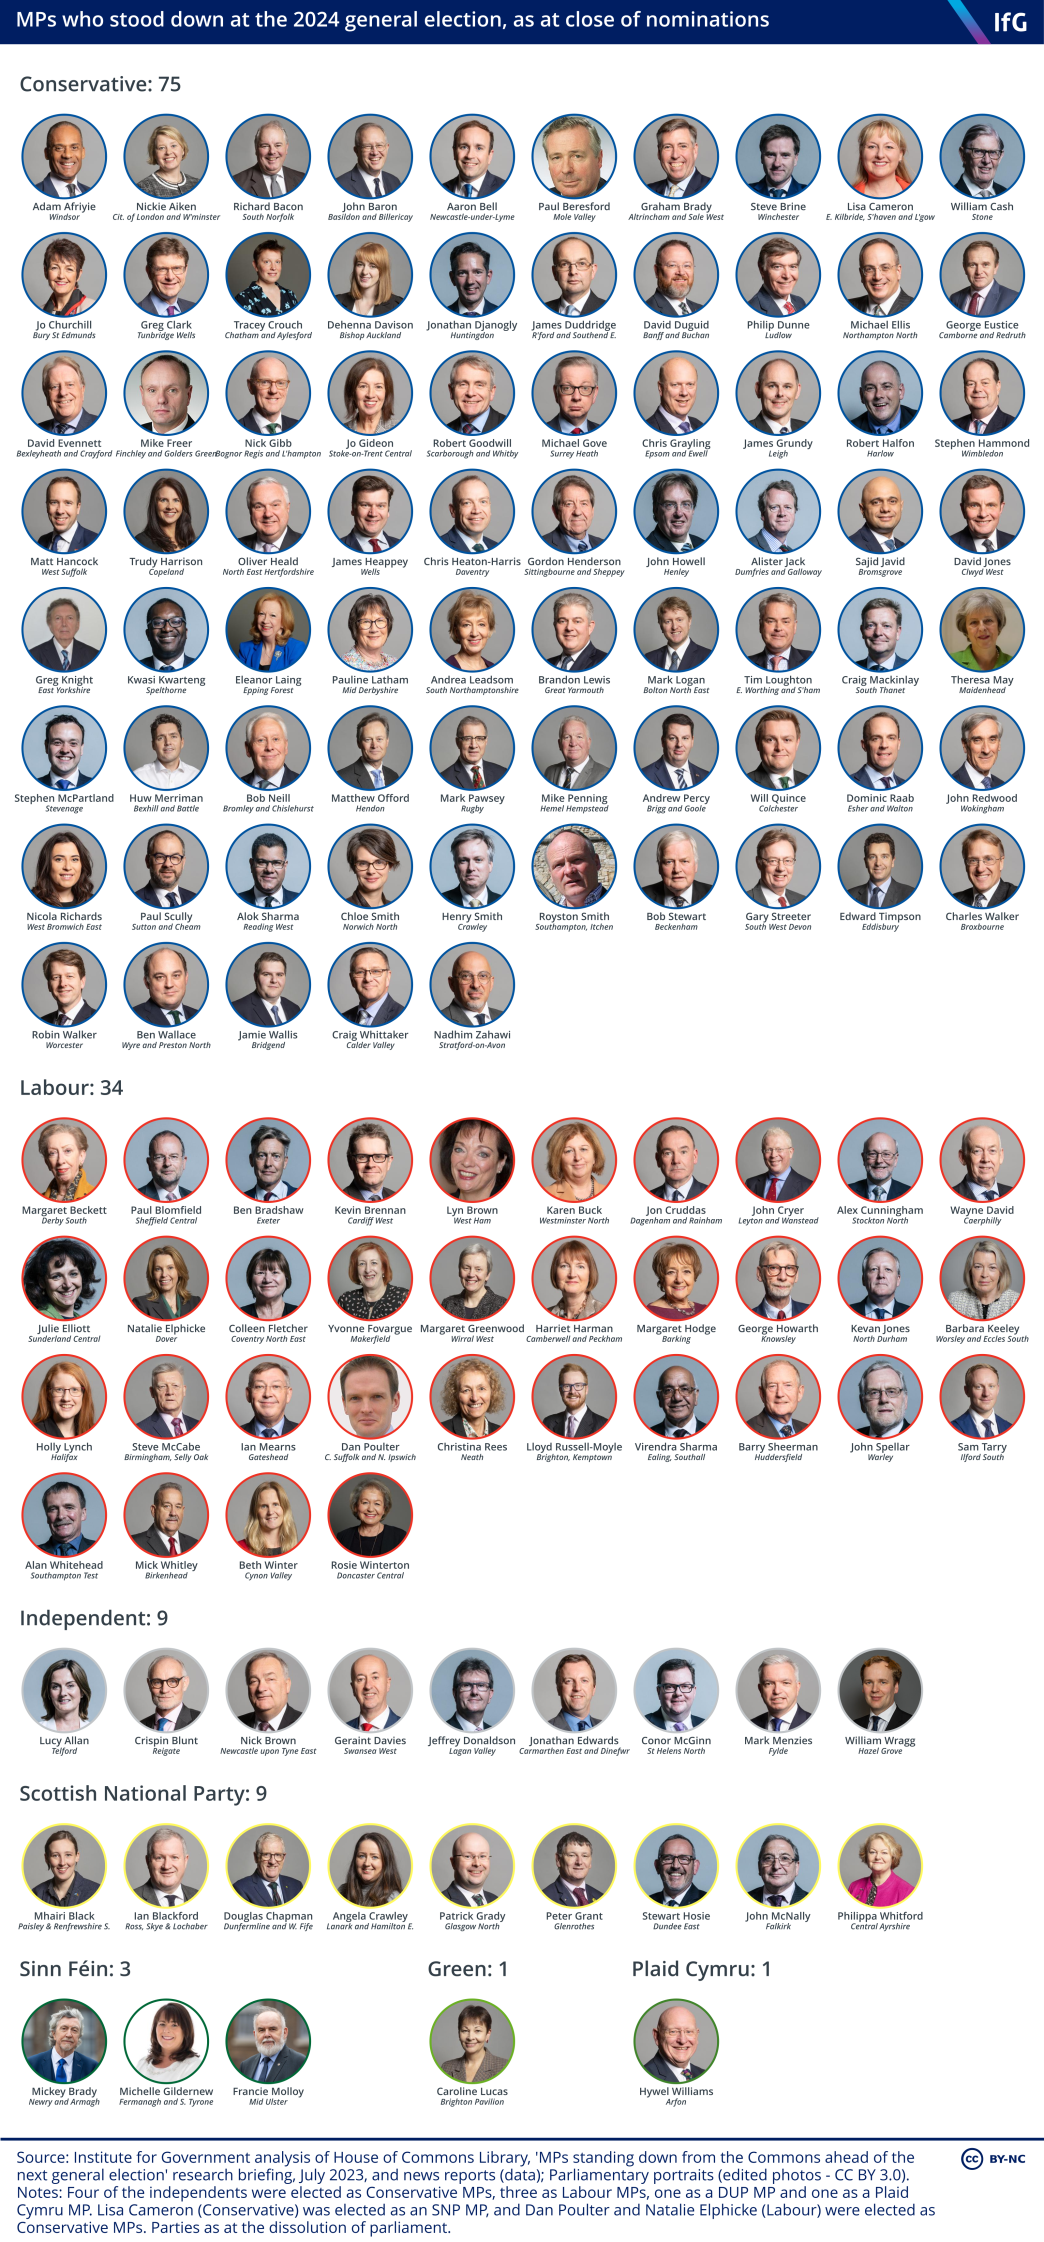 An Institute for Government graphic showing MPs who stood down at the 2024 general election, as at the close of nominations, where there are 132 MPs who stood down in total, including 75 Conservative and 34 Labour MPs, and featuring people such as Theresa May, Dominic Raab and Michael Gove.